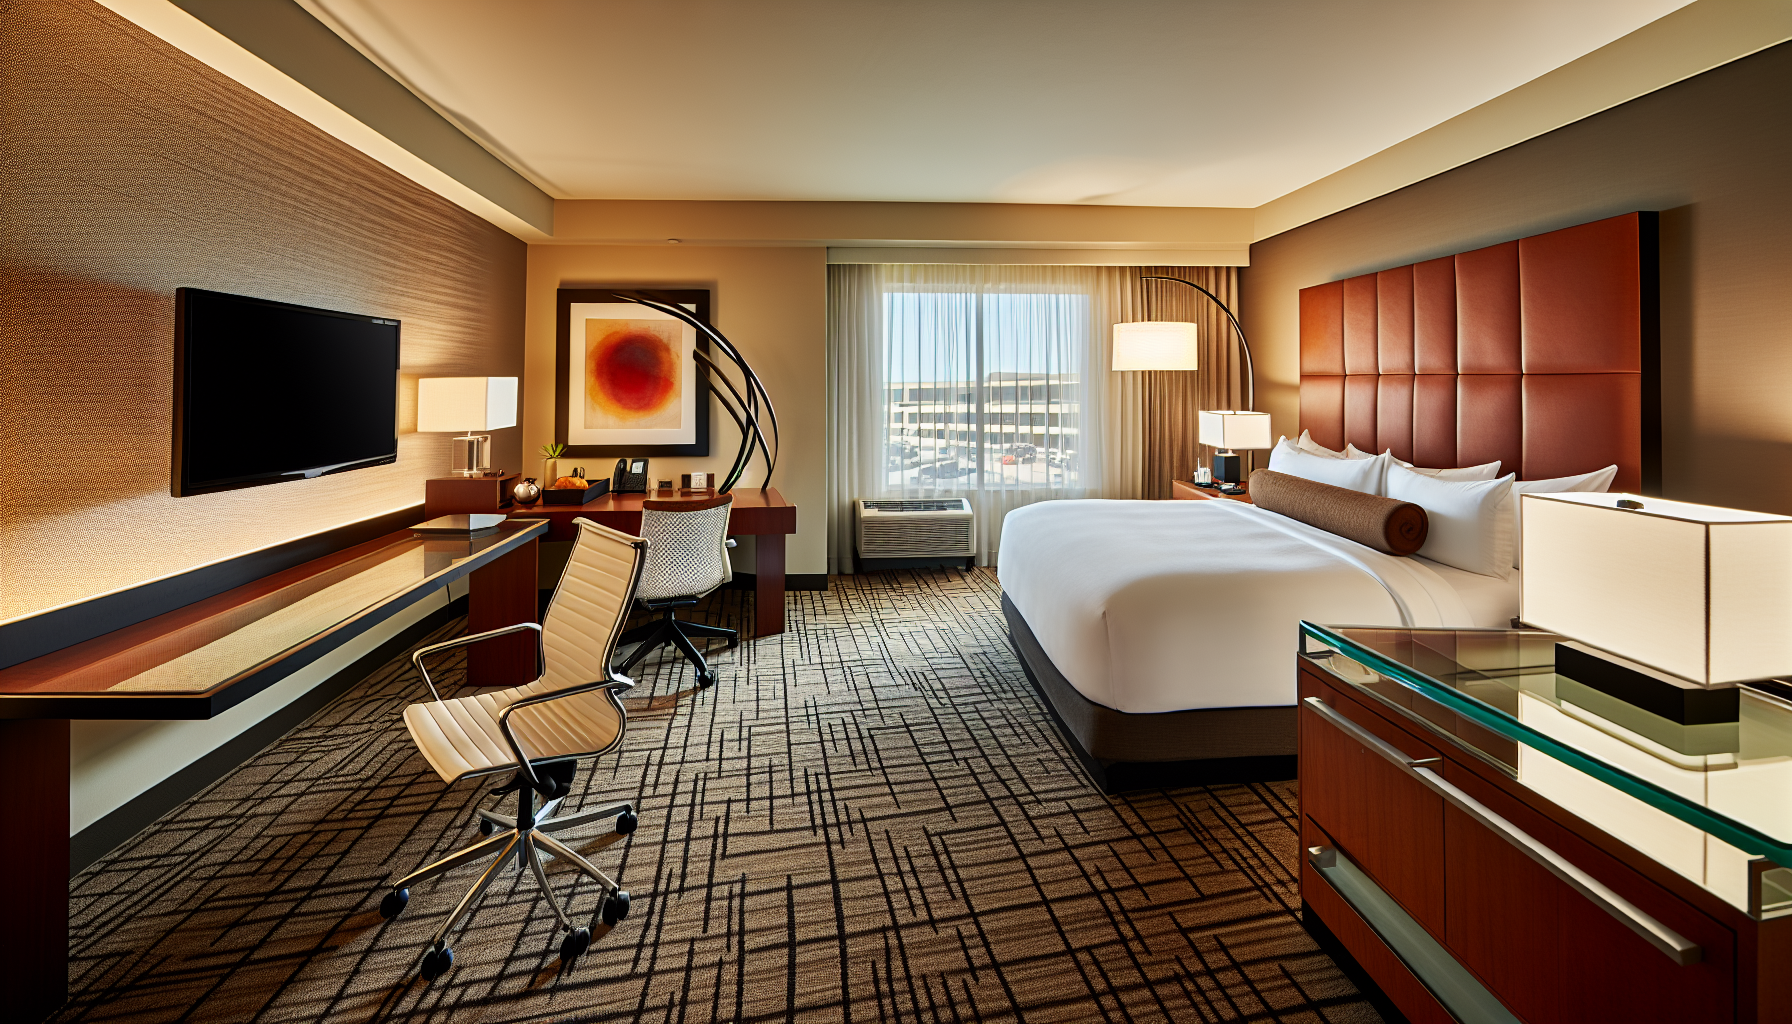 Spacious guest room at Marriott hotel near Fort Lauderdale airport